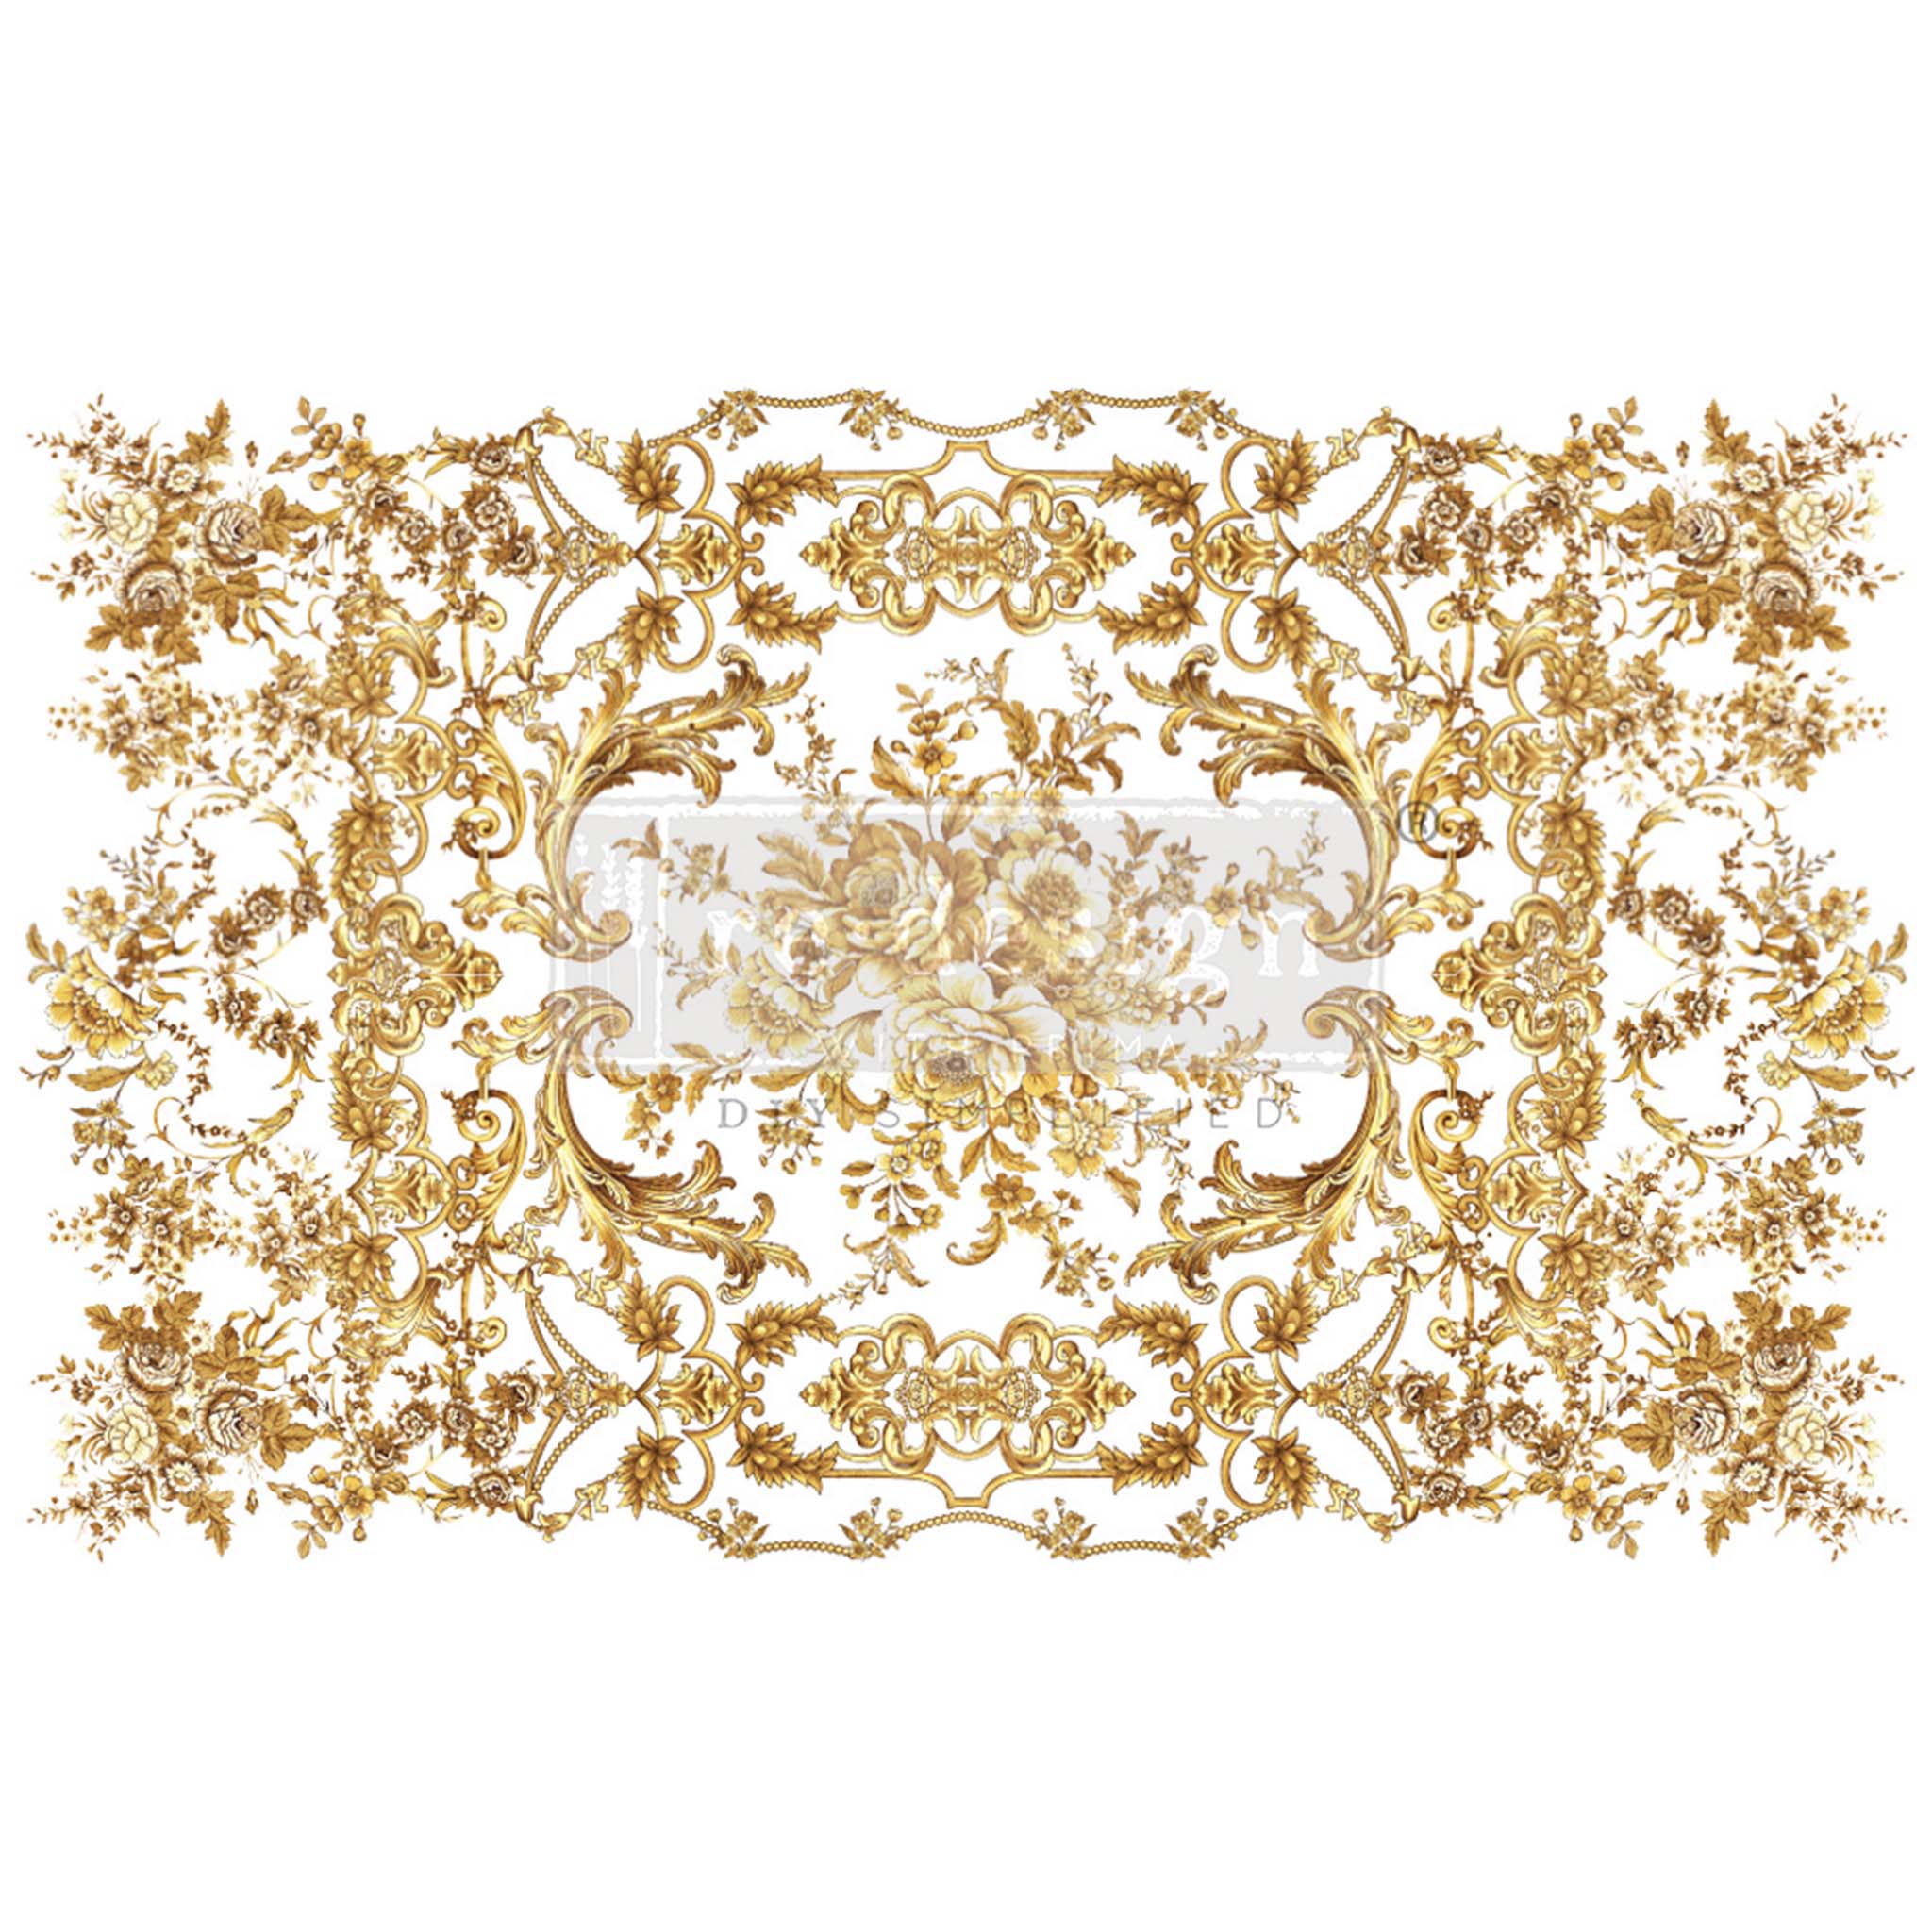 Rub-on transfer of a golden vining pattern with a central gold rose bouquet.